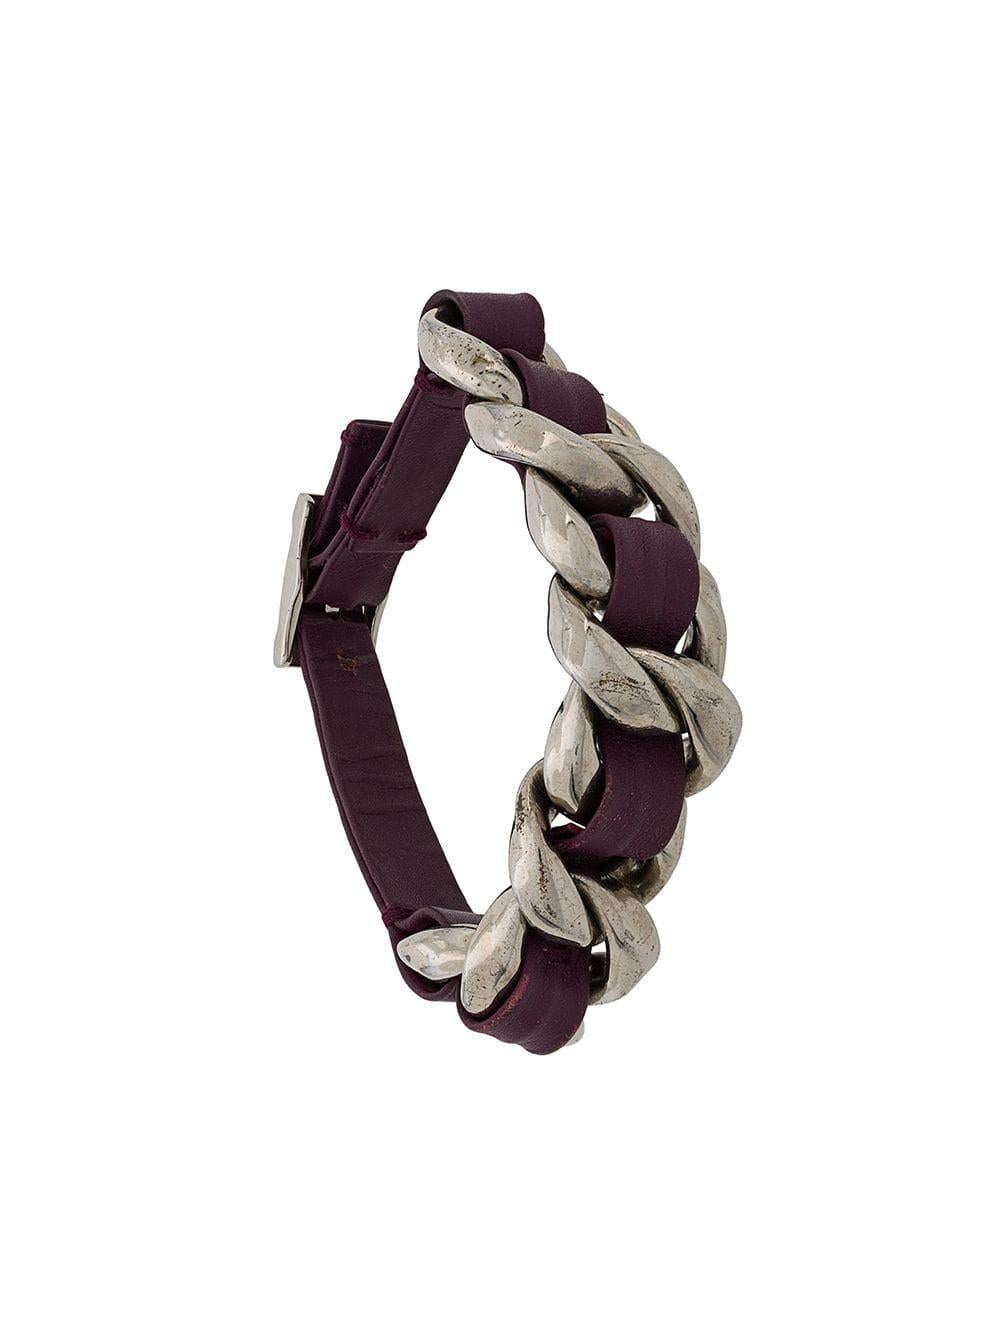 Brimming with romance and sweet femininity, this woven logo bracelet by Chanel is meticulously crafted from an intricate combination of silver-plated metal and purple lambskin leather, features a chain-link design that is full of nods to the